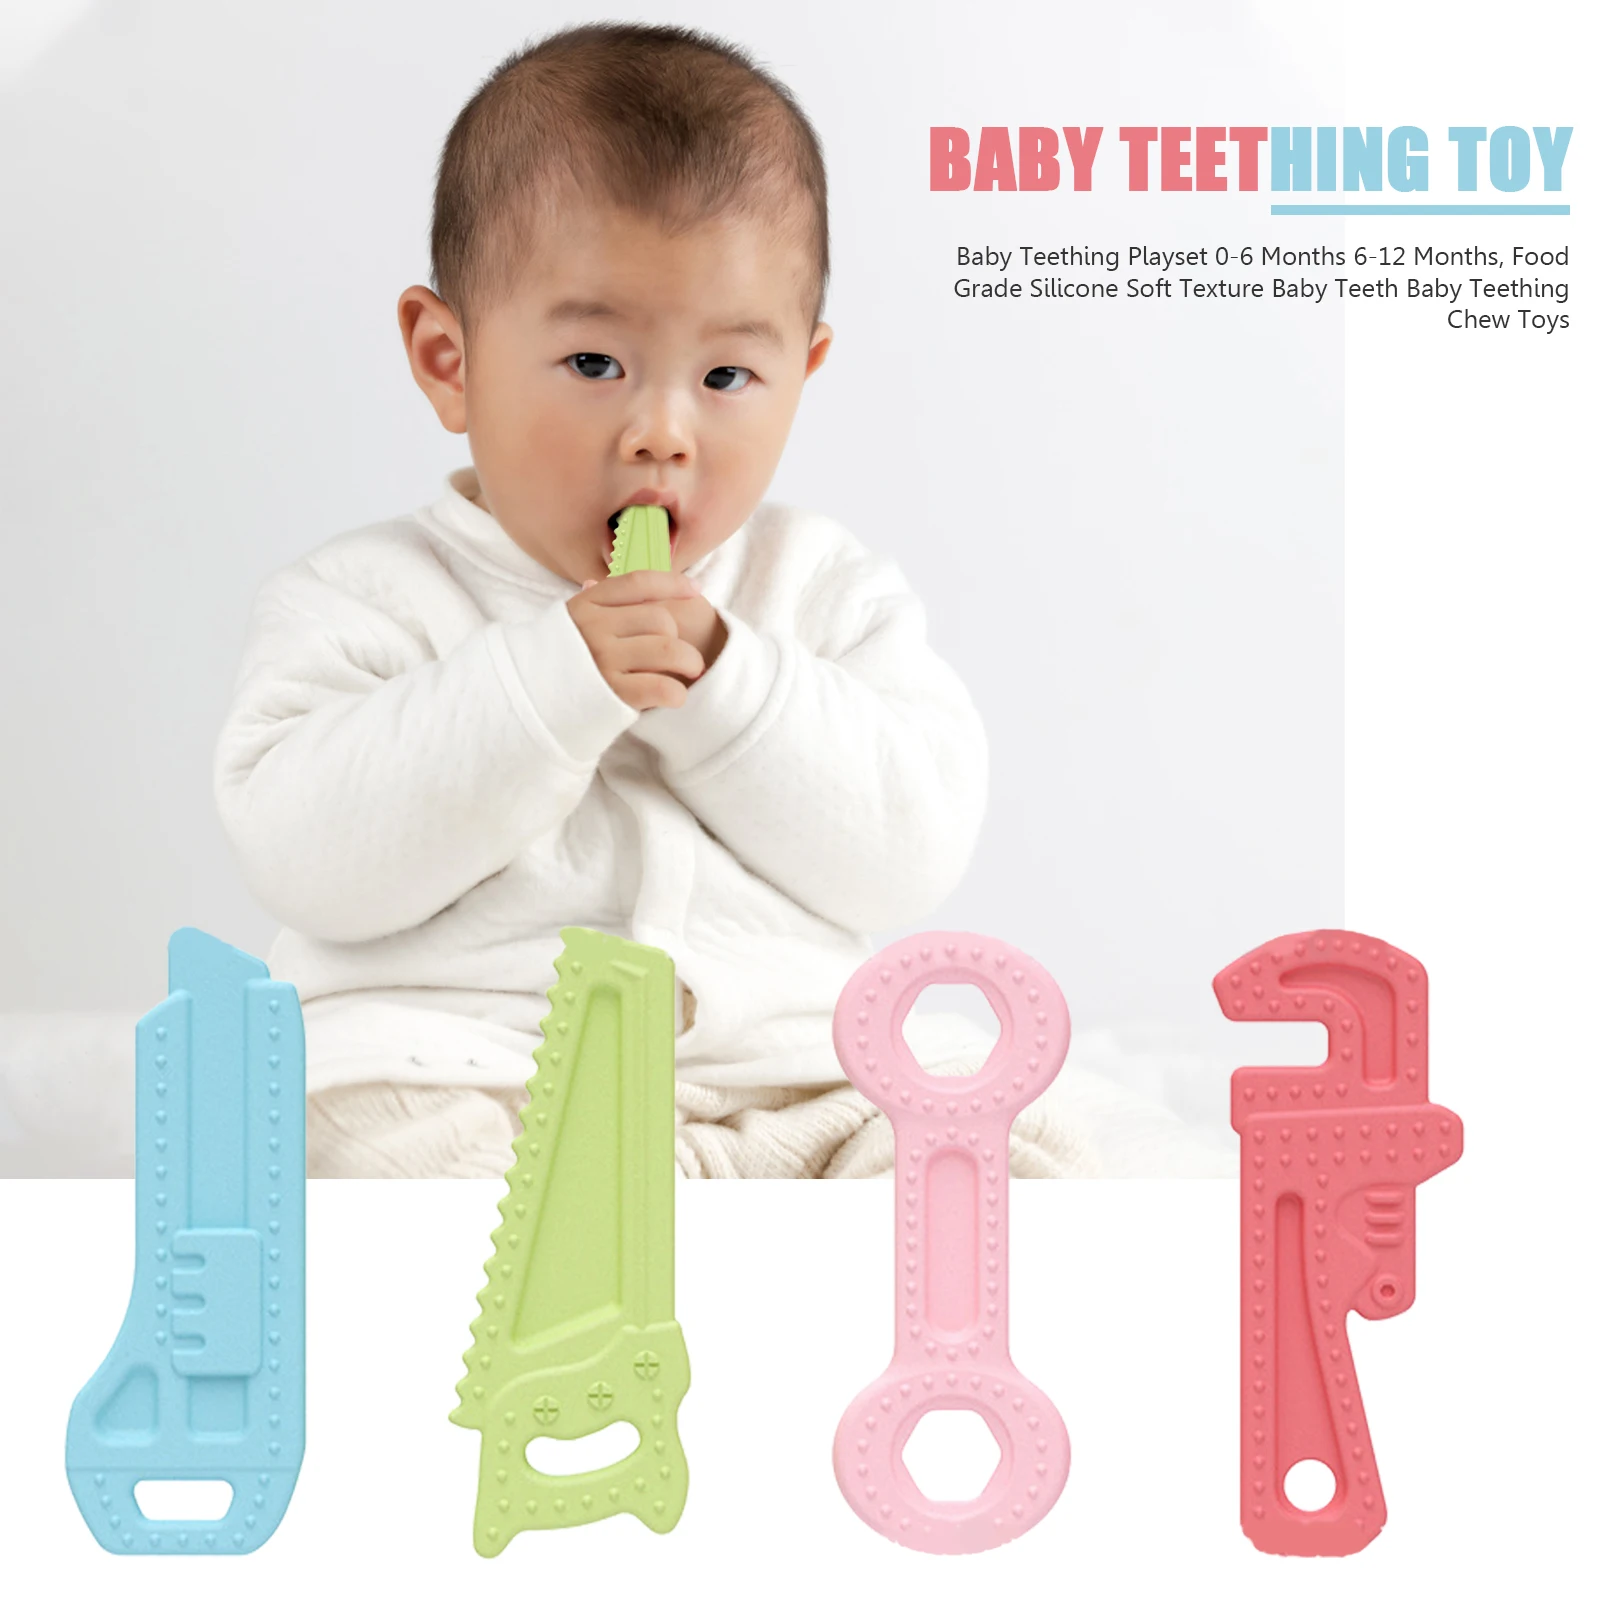 

Baby Teethers 0-6 Months4PCS Silicone Baby Teething Toys Set BPA Free Oral Motor Stimulation Relief Soothe Babies Gums Set